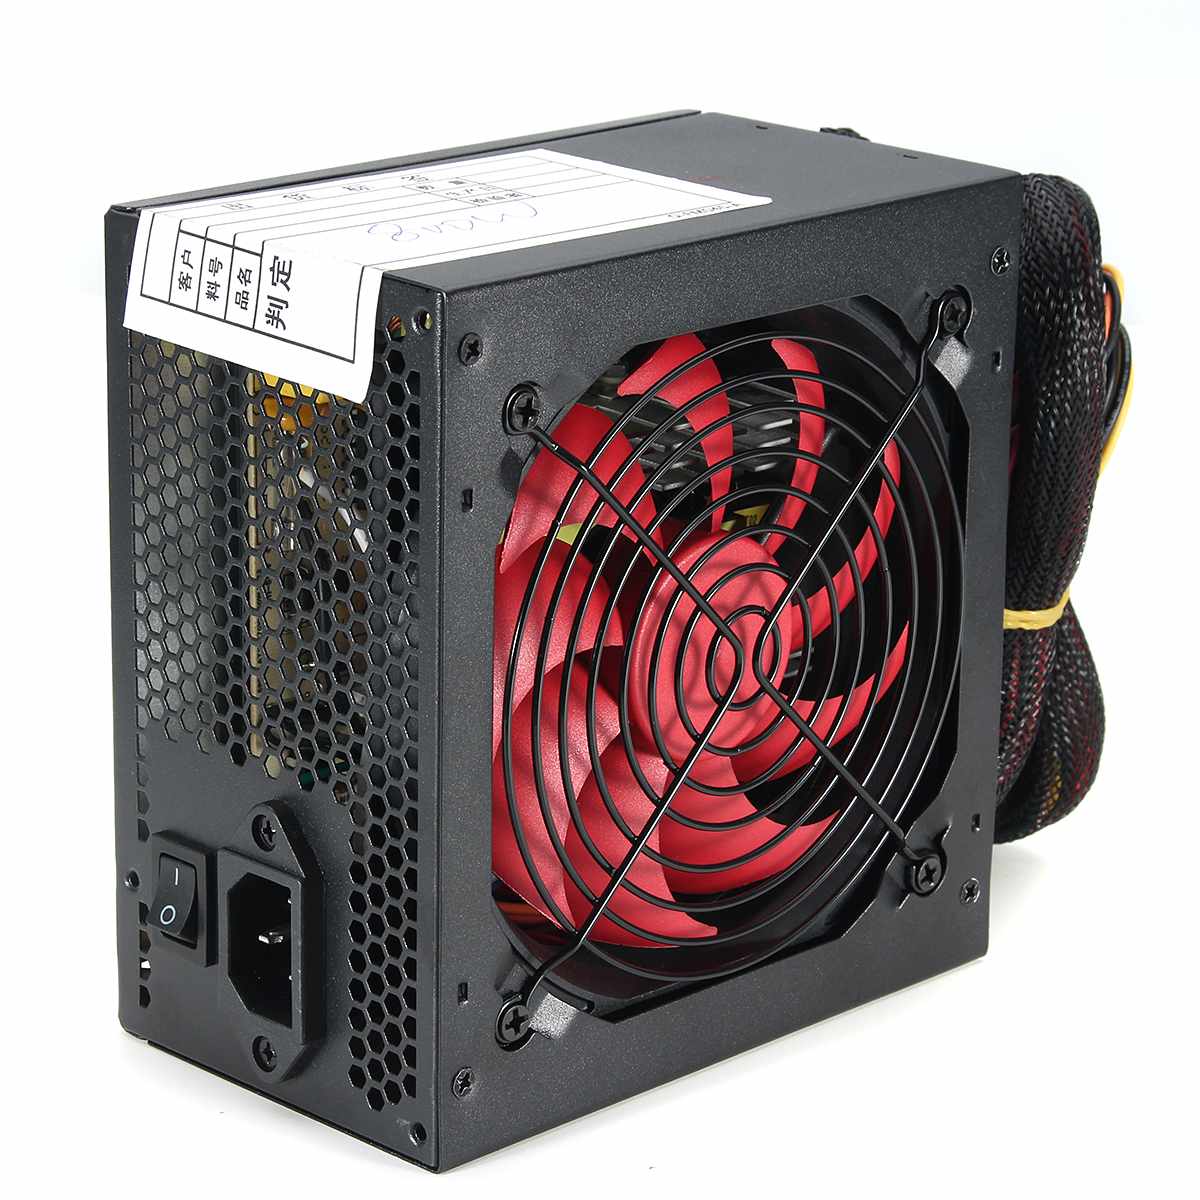 800W Multi-channel PC Power Supply with 12cm Fan Computer Power Supply for Intel AMD PC 12V ATX SLI PCI-E PC Gaming